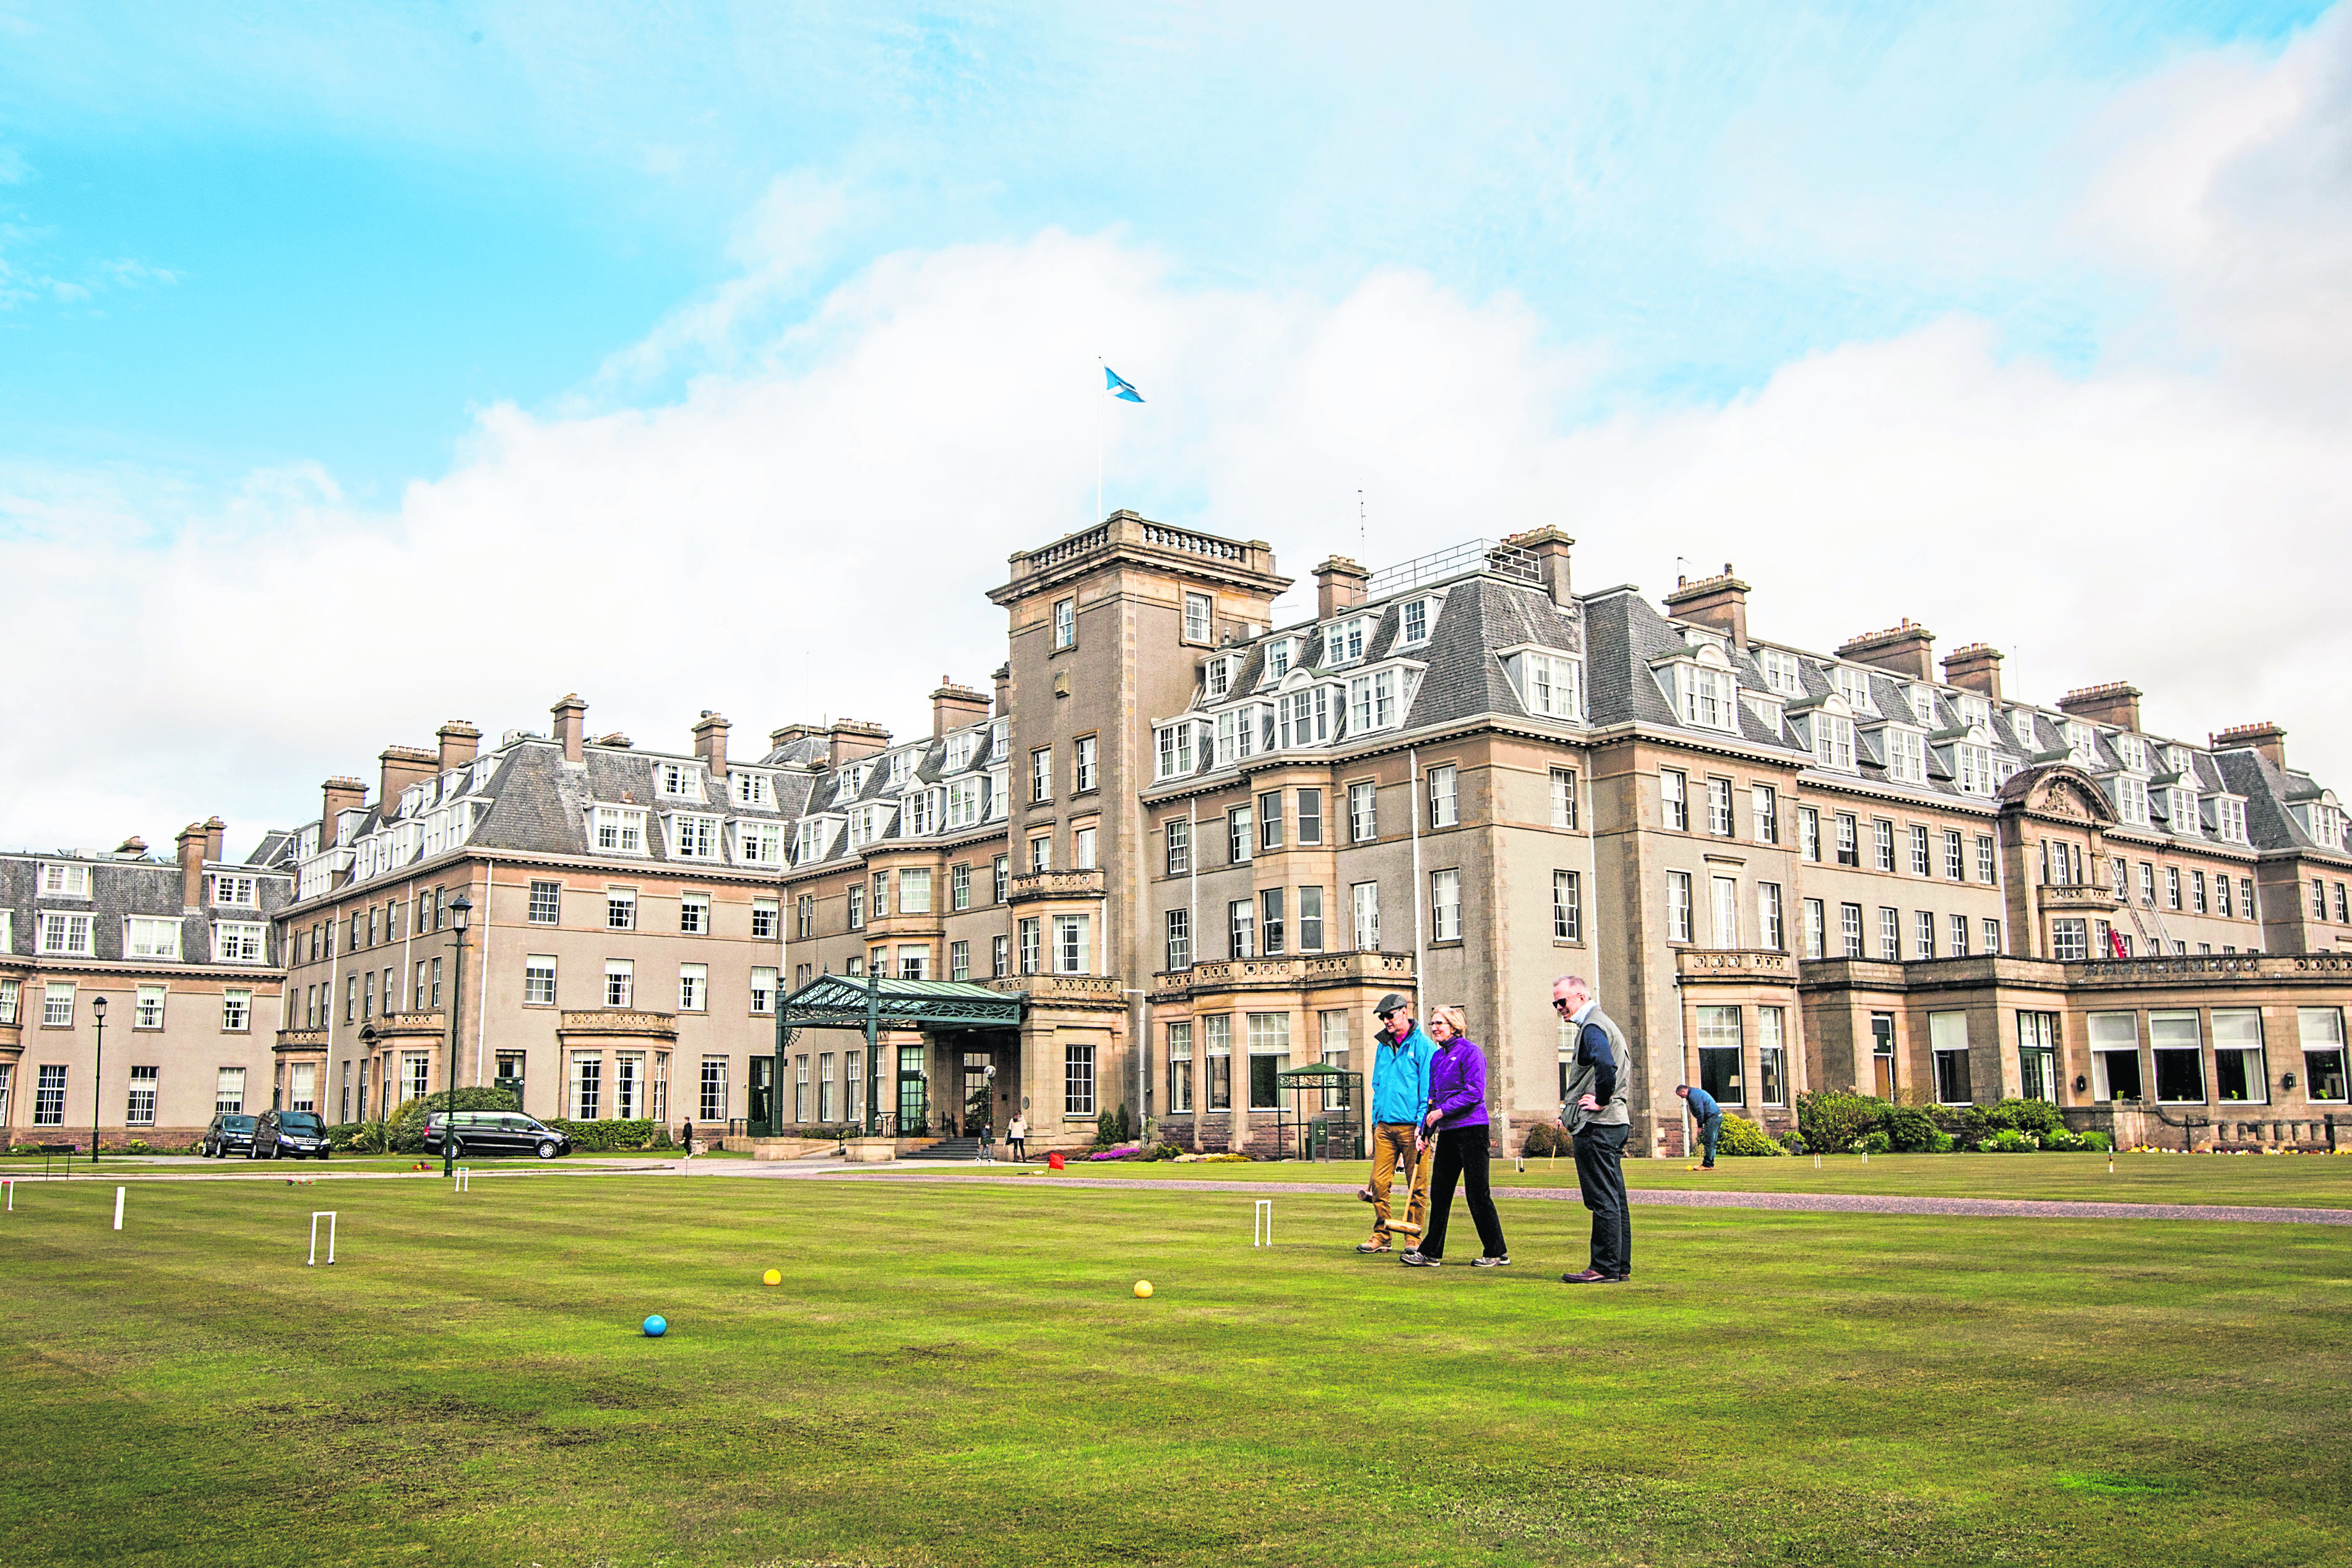 Croquet being played on the lawn at Gleneagles Hotel.